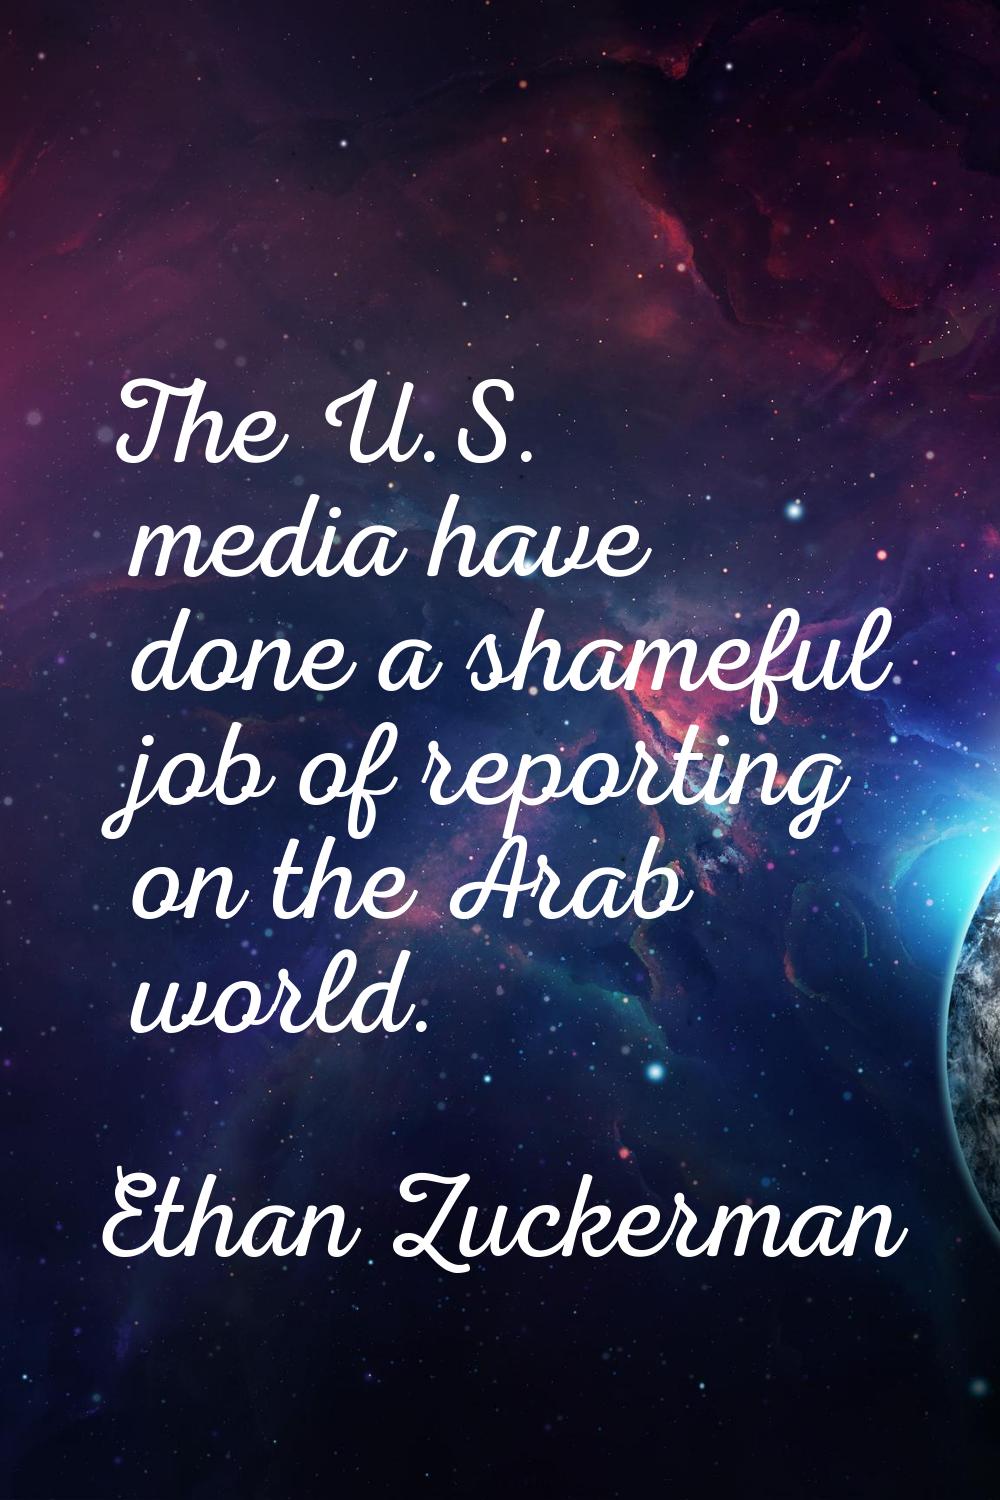 The U.S. media have done a shameful job of reporting on the Arab world.